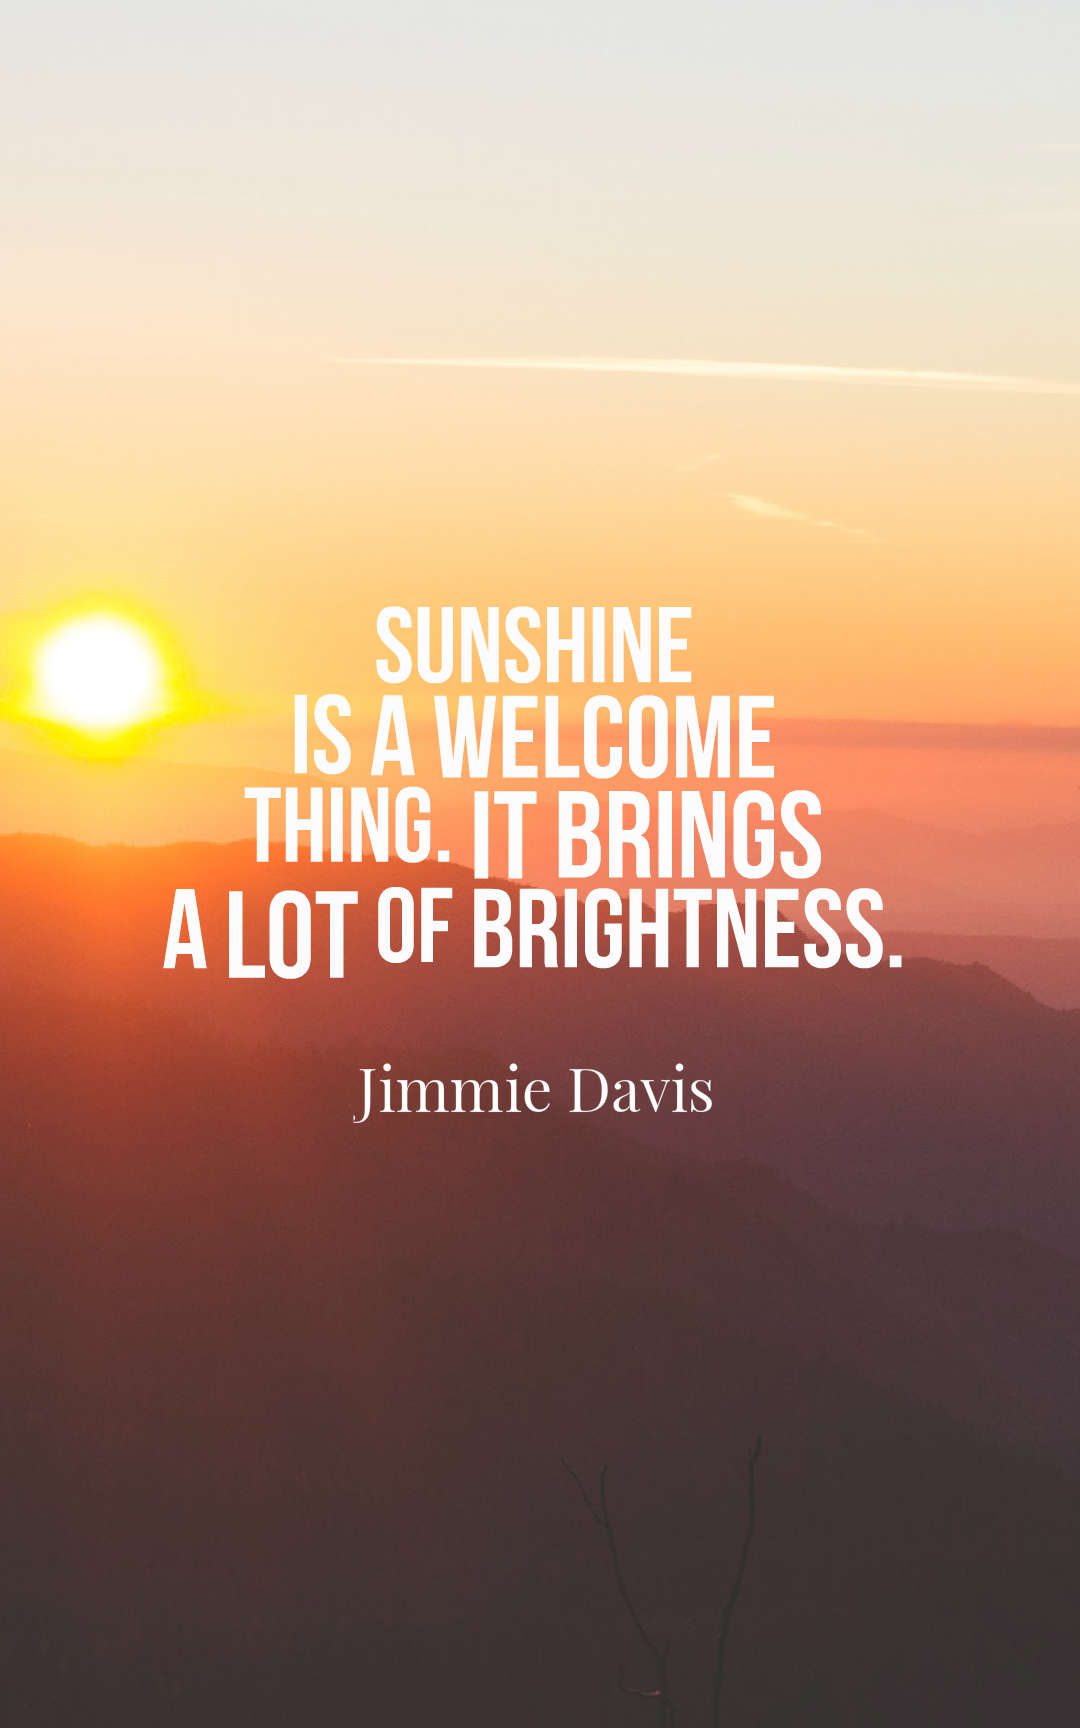 Sunshine is a welcome thing. It brings a lot of brightness.